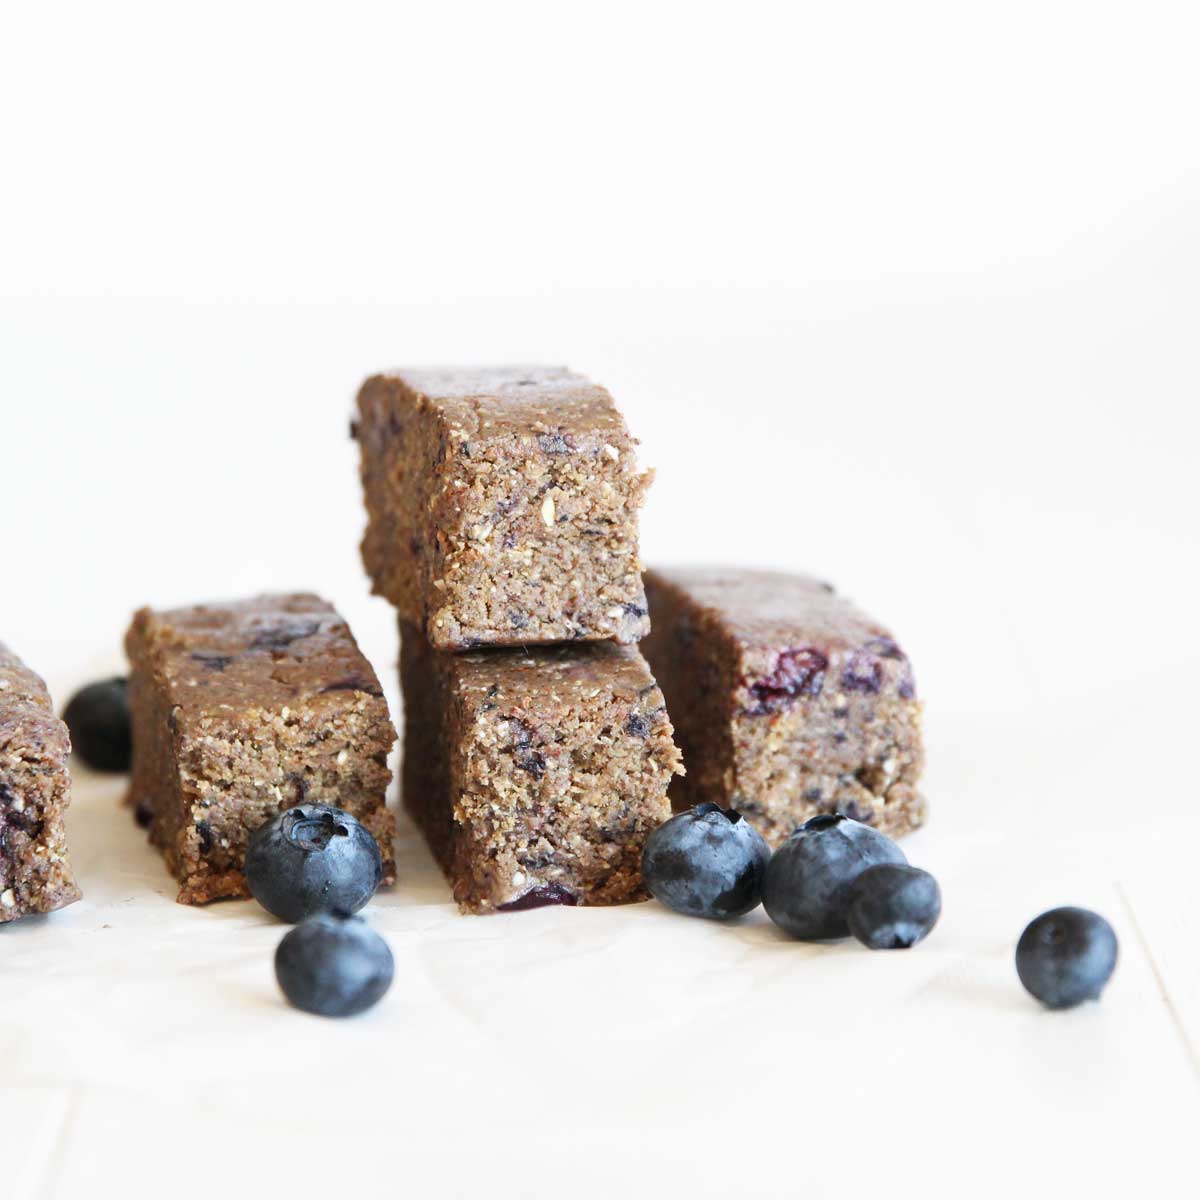 Homemade Blueberry Oatmeal Protein Bars (Healthy, Wholesome Vegan Recipe!) - birthday cake protein bars